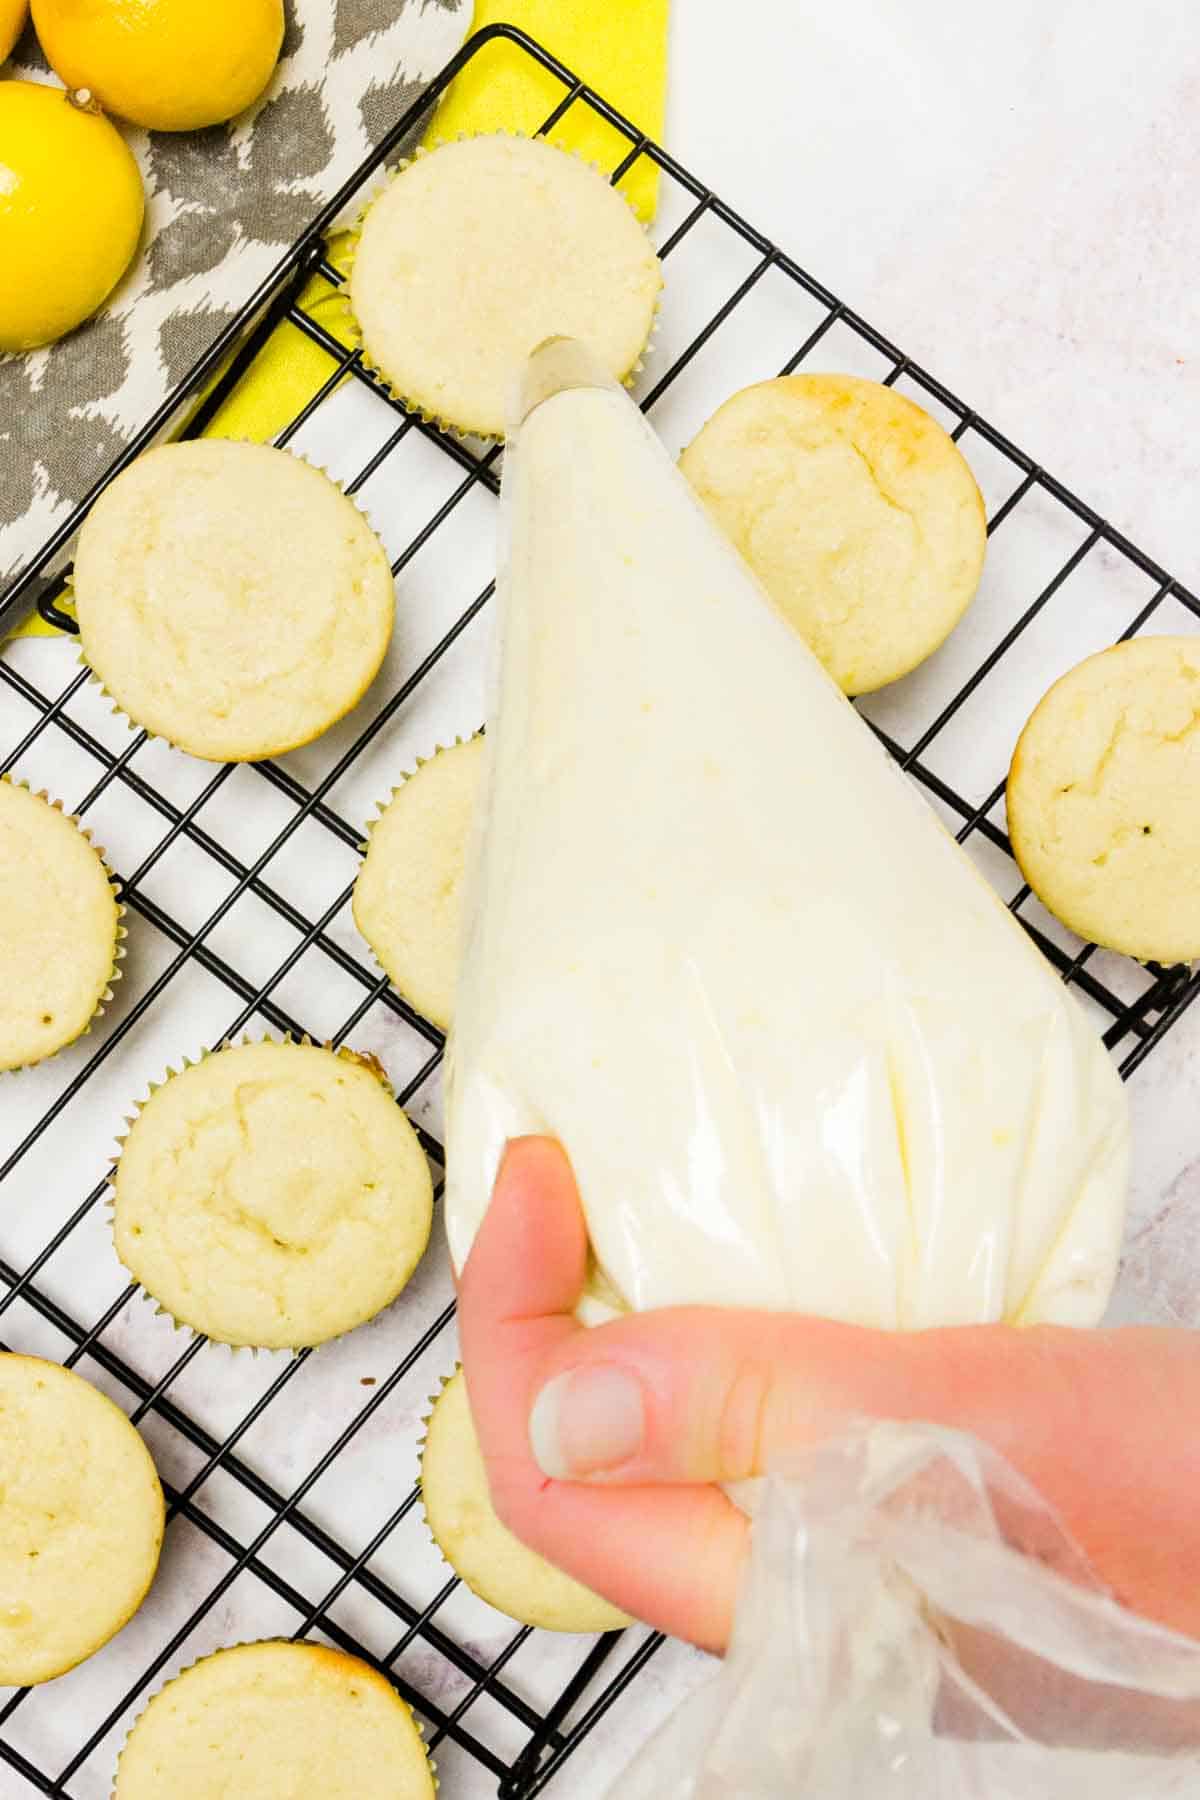 A hand holds a piping bag filled with lemon frosting over rows of baked gluten-free lemon cupcakes on a wire rack.